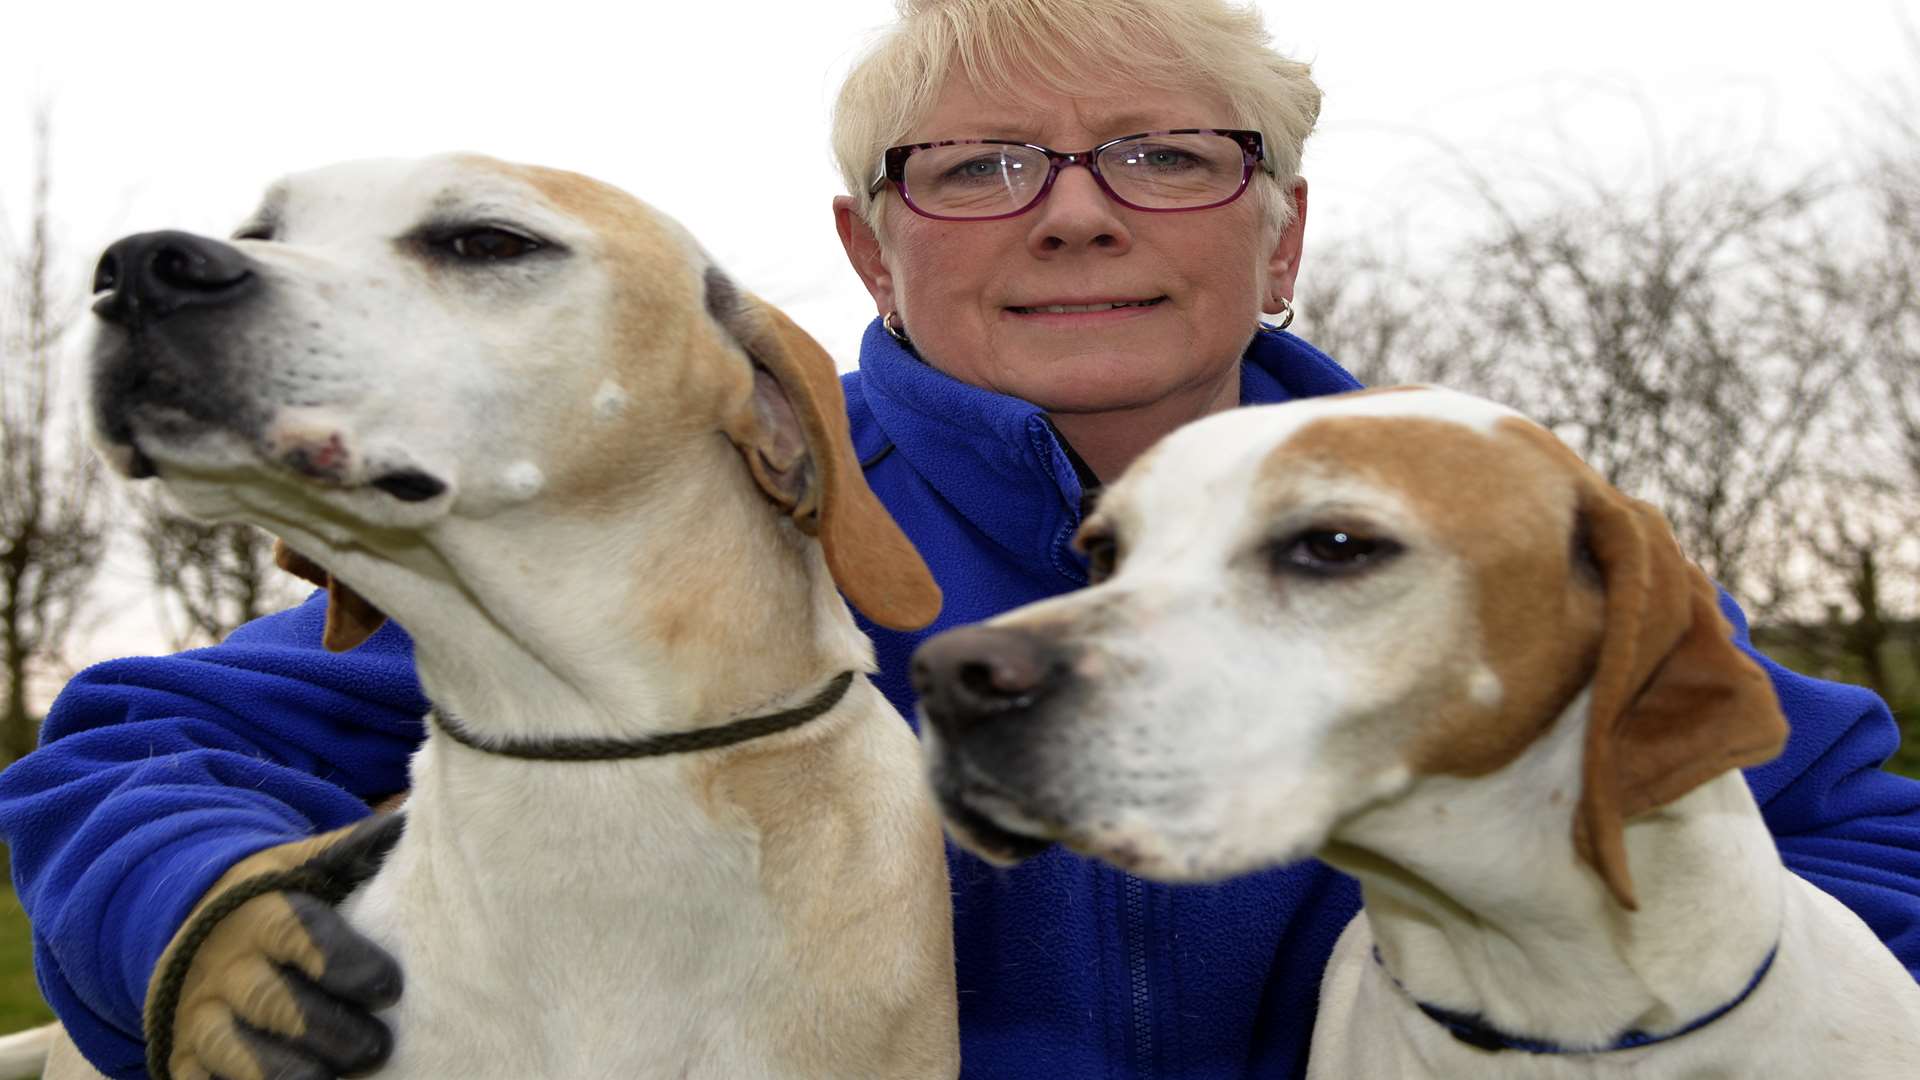 Christine Naden and her dogs, Abbey and Jamie, which finished first and second respectively in different classes at Crufts